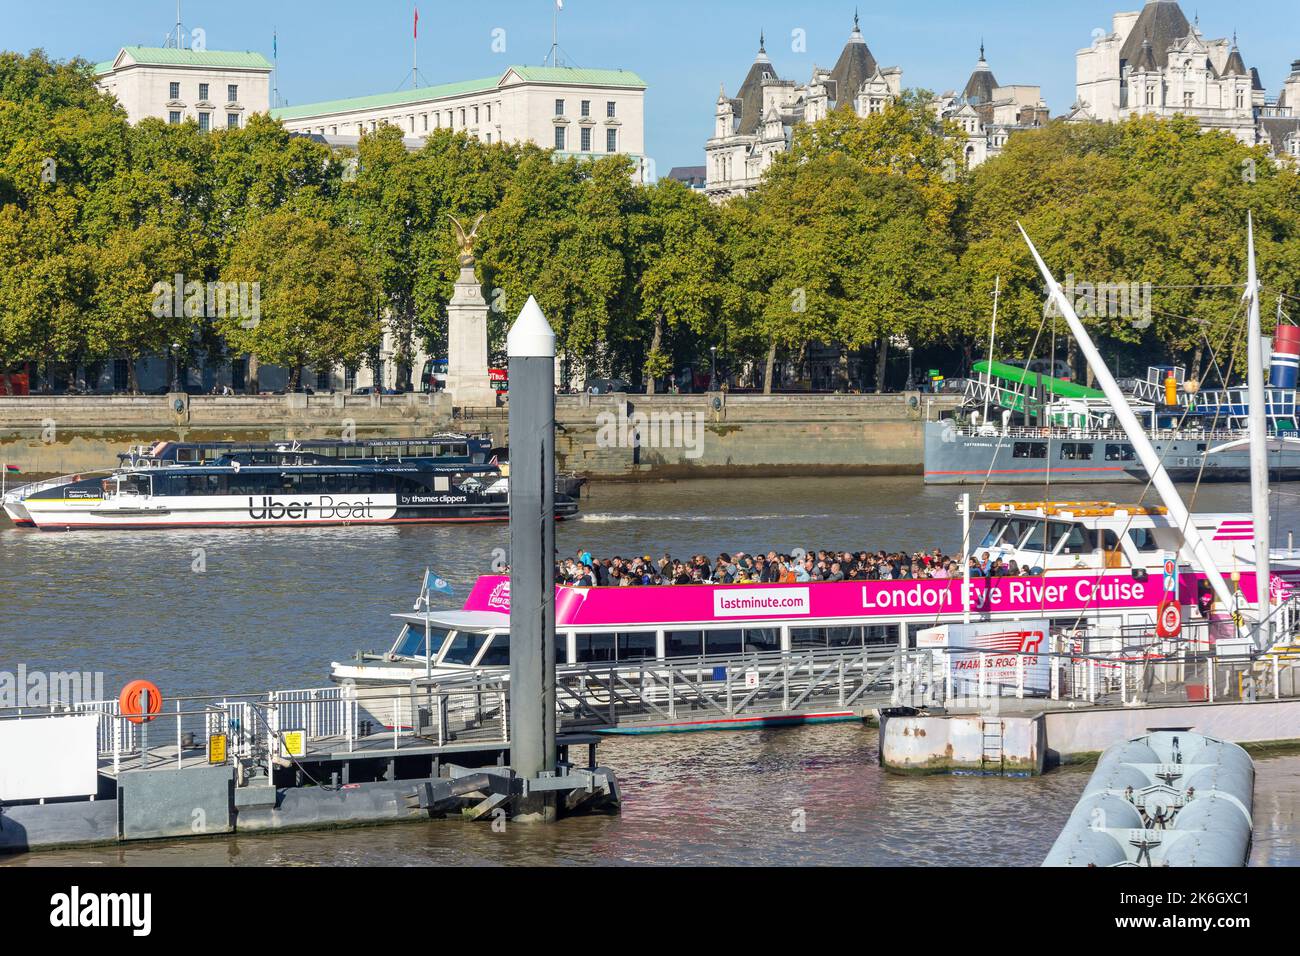 London Eye River Cruise et Uber Boats on River Thames, London Borough of Lambeth, Greater London, Angleterre, Royaume-Uni Banque D'Images